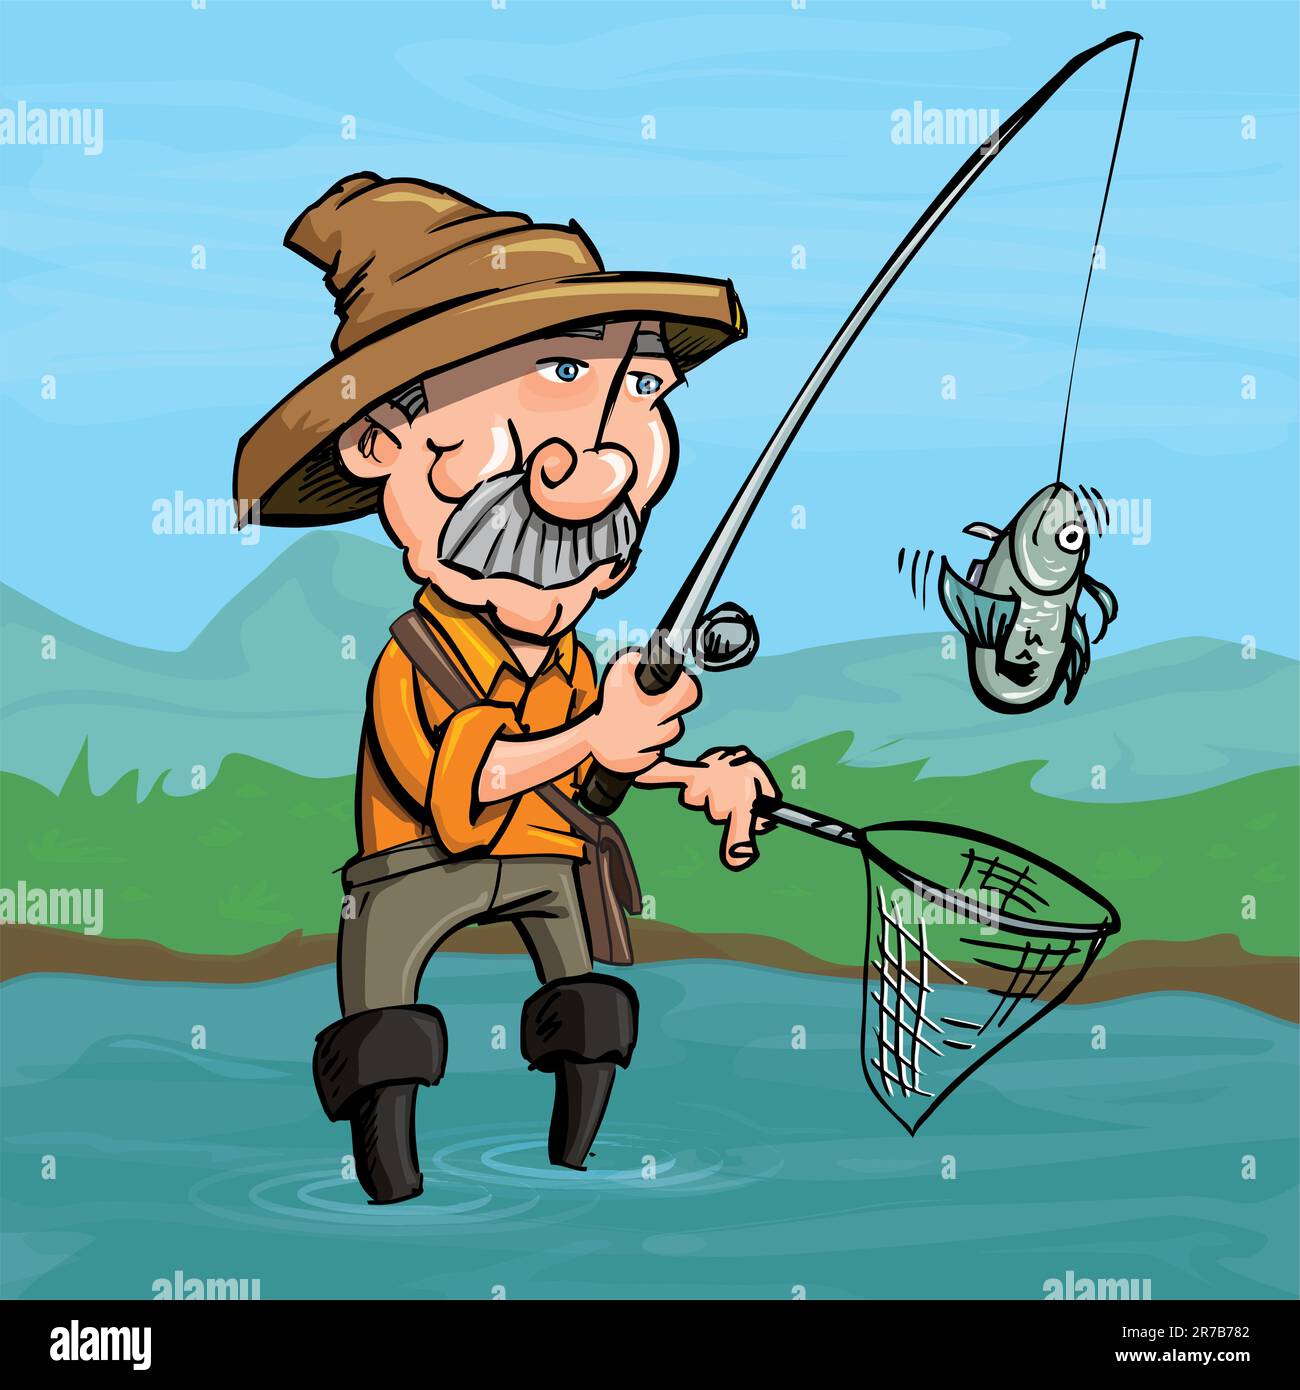 Cartoon fisherman catching a fish. He is standing in a river Stock